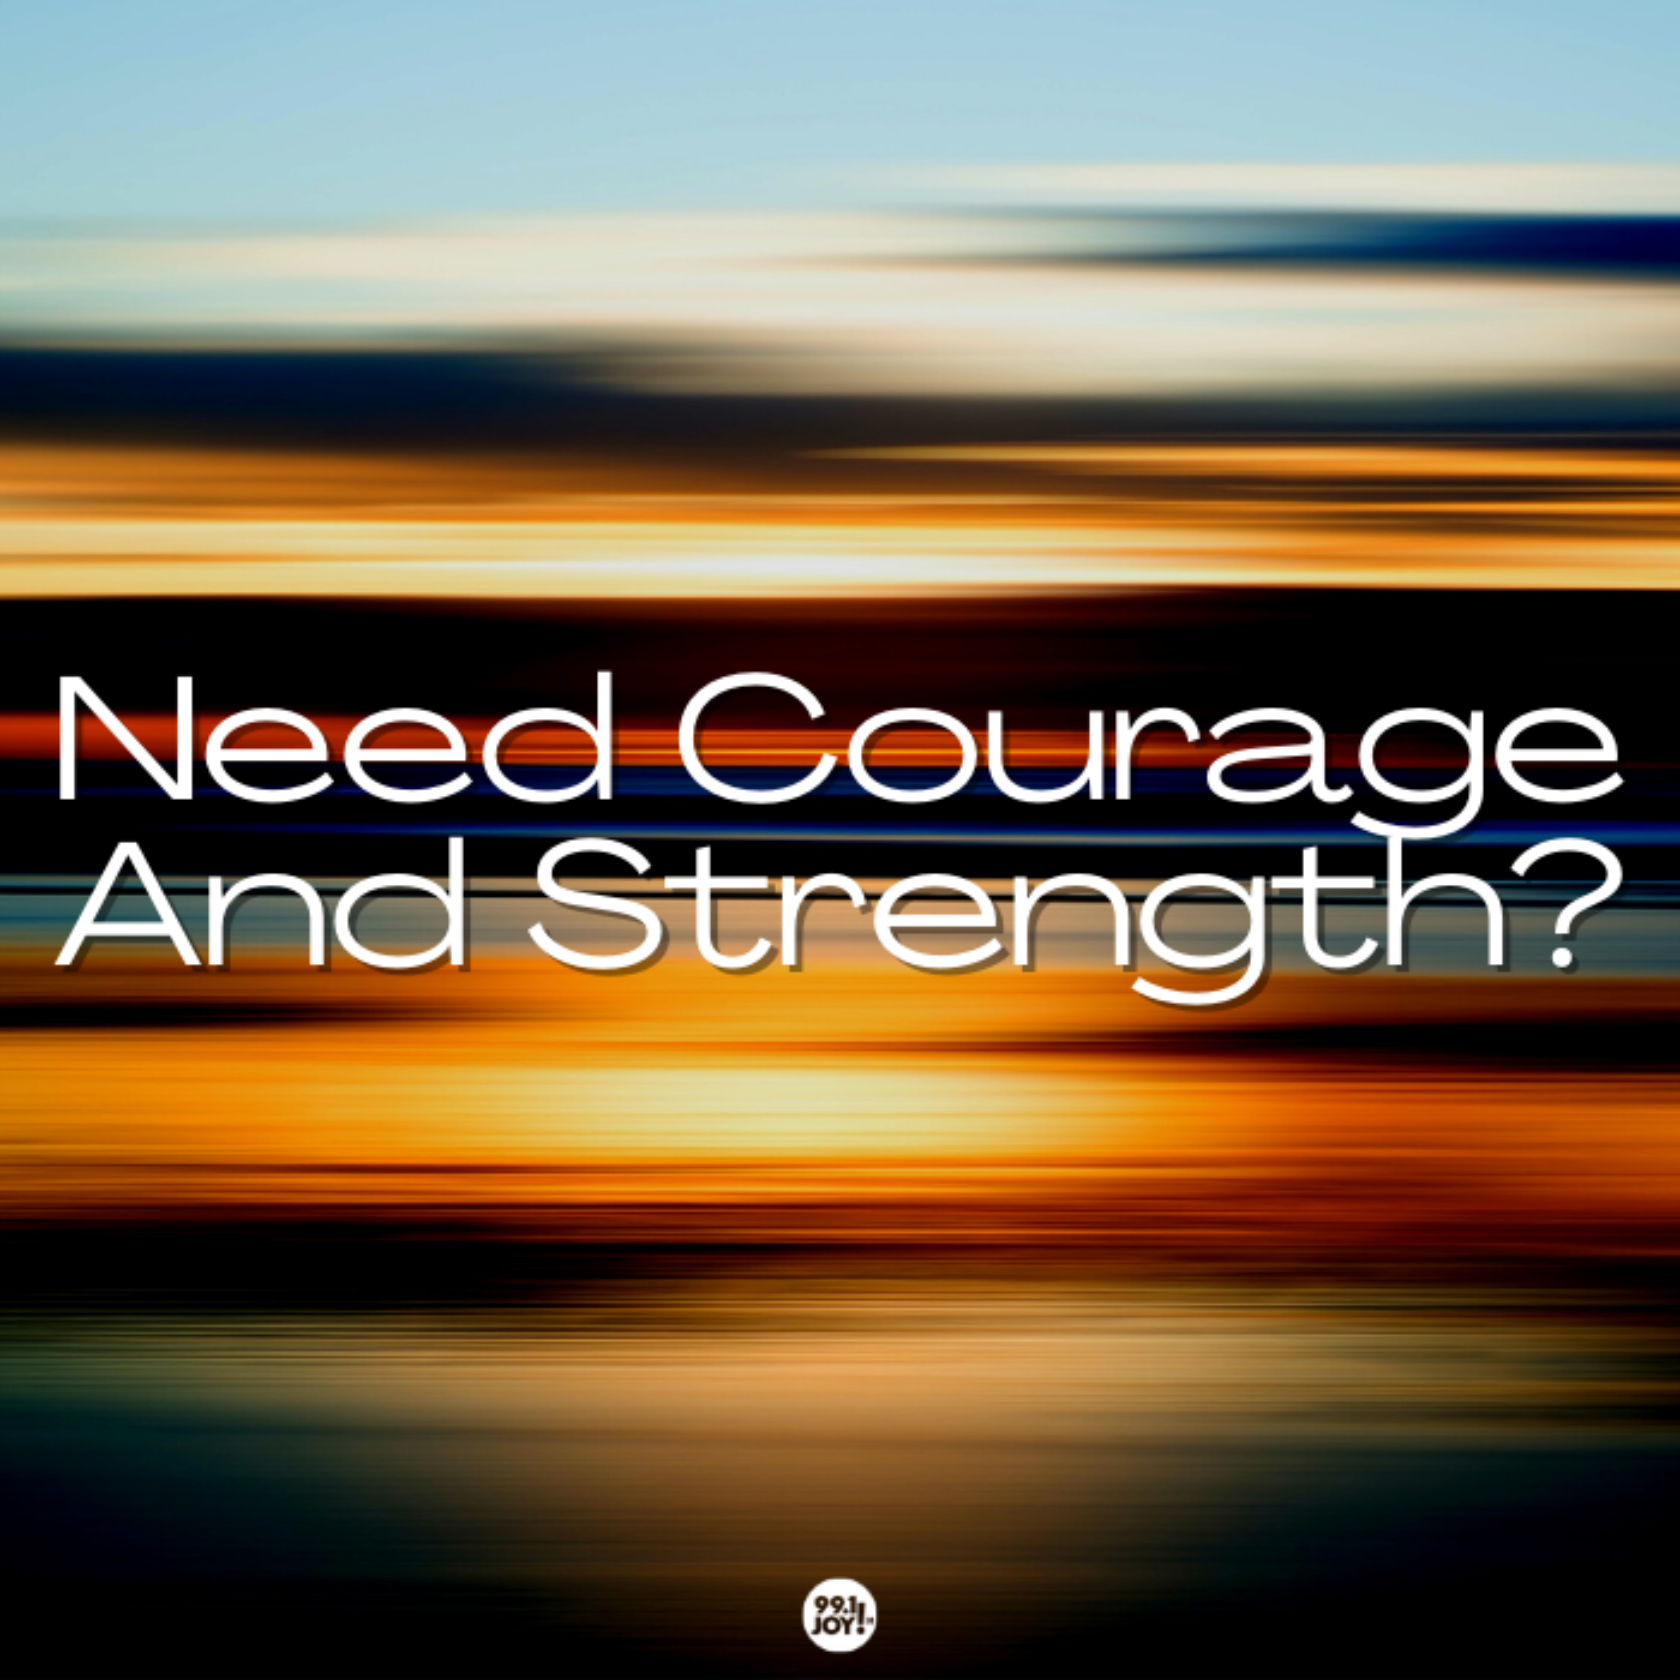 Need Courage And Strength?